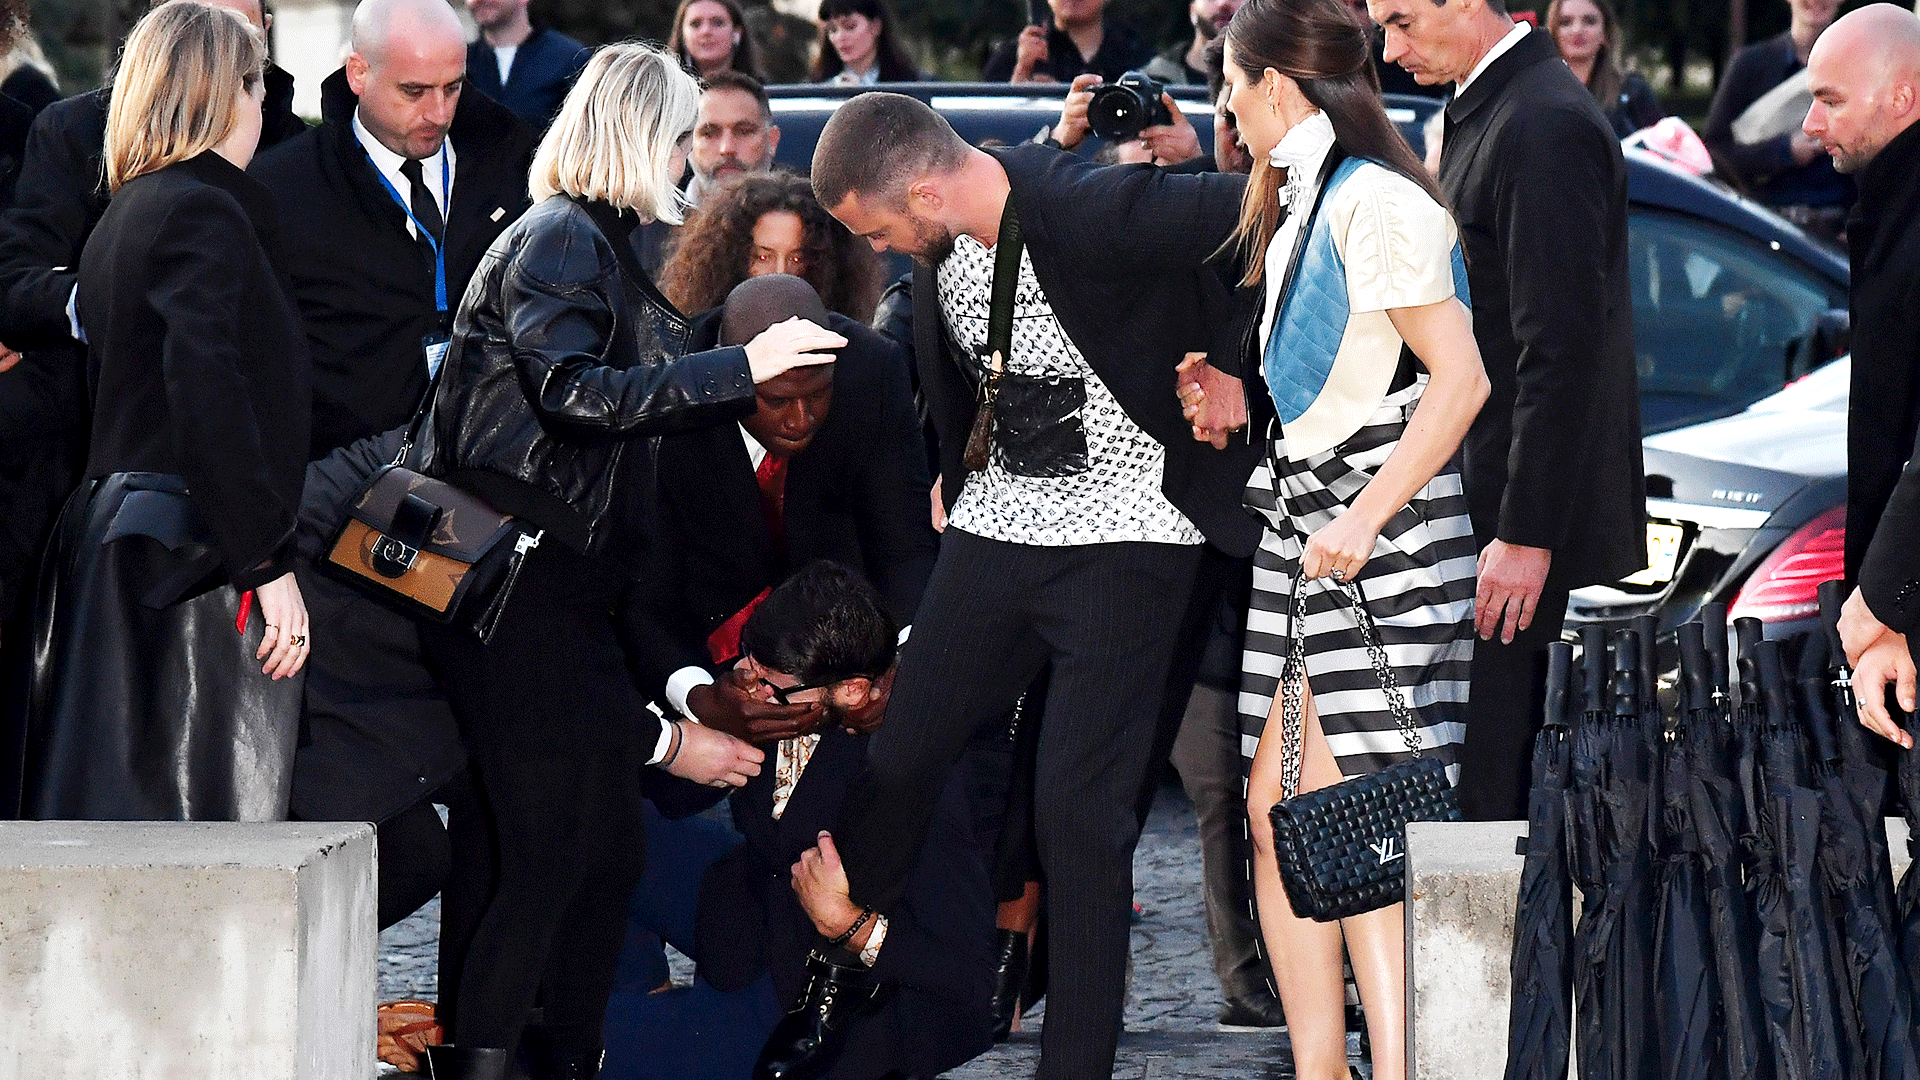 Justin Timberlake Is Nearly Tackled by Fan as He Enters Paris